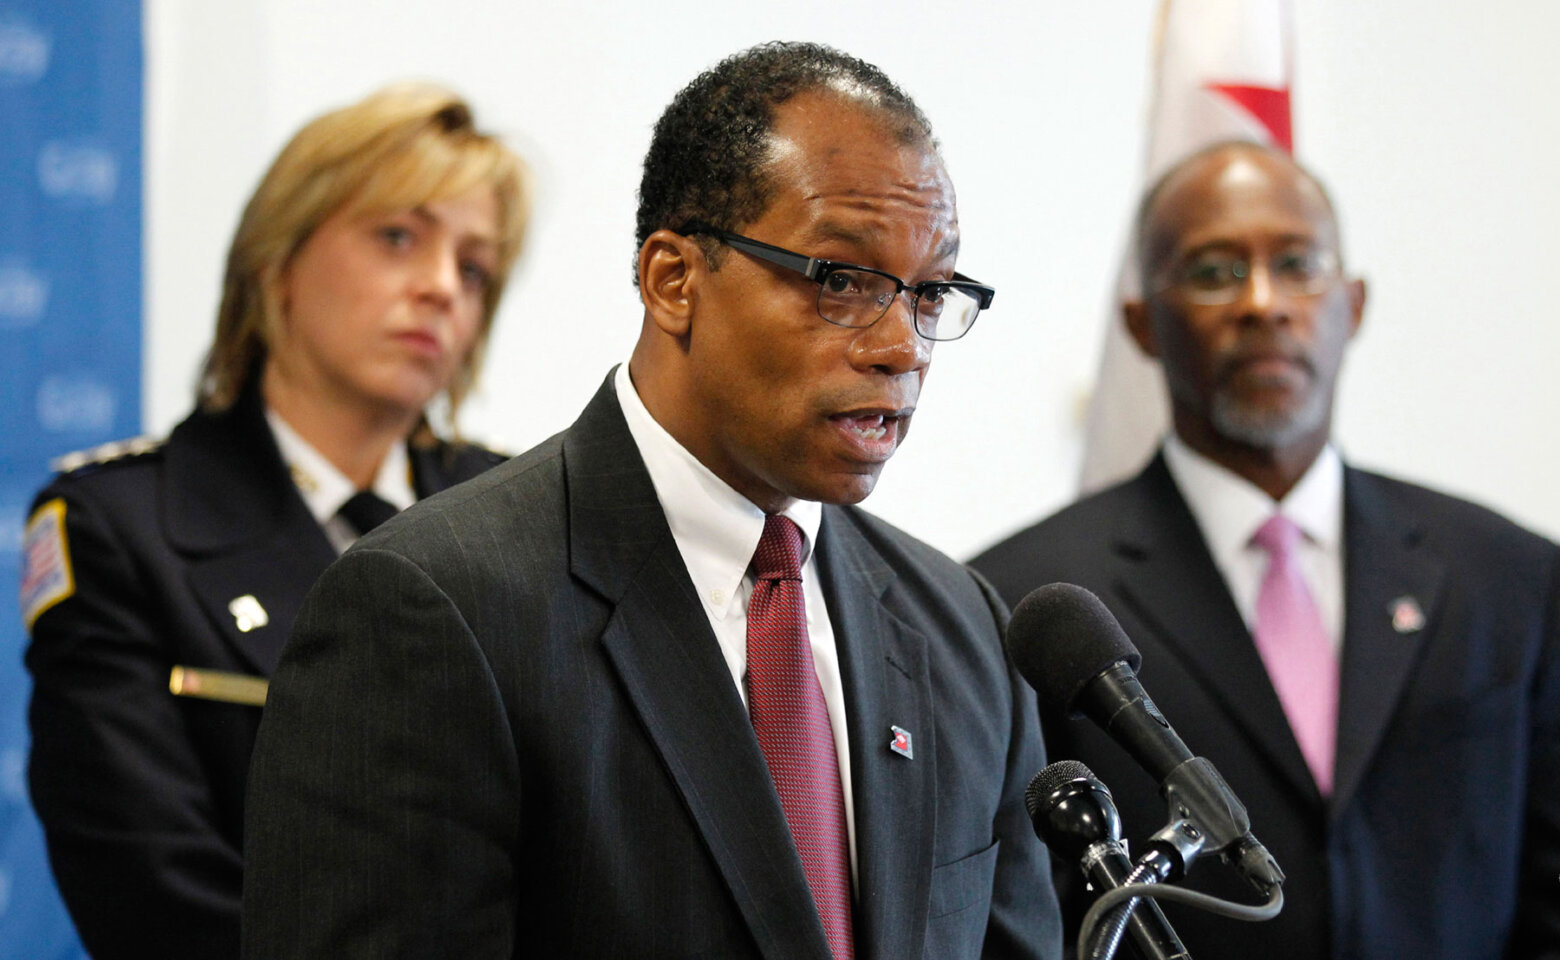 Reports: D.C. fire chief Ellerbe to step down